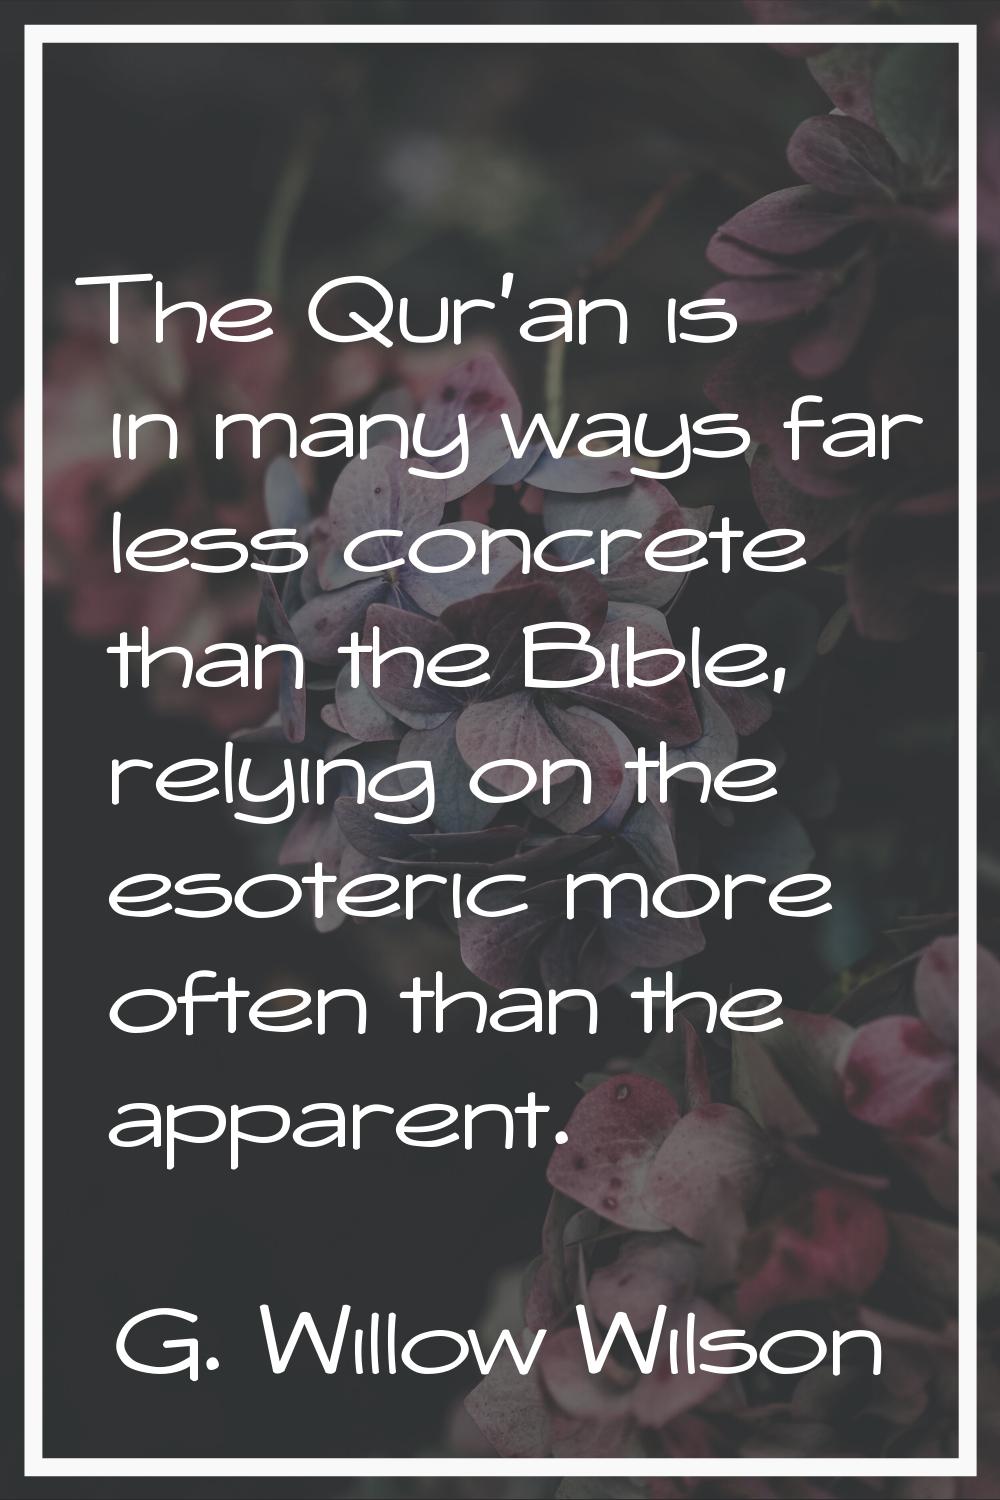 The Qur'an is in many ways far less concrete than the Bible, relying on the esoteric more often tha